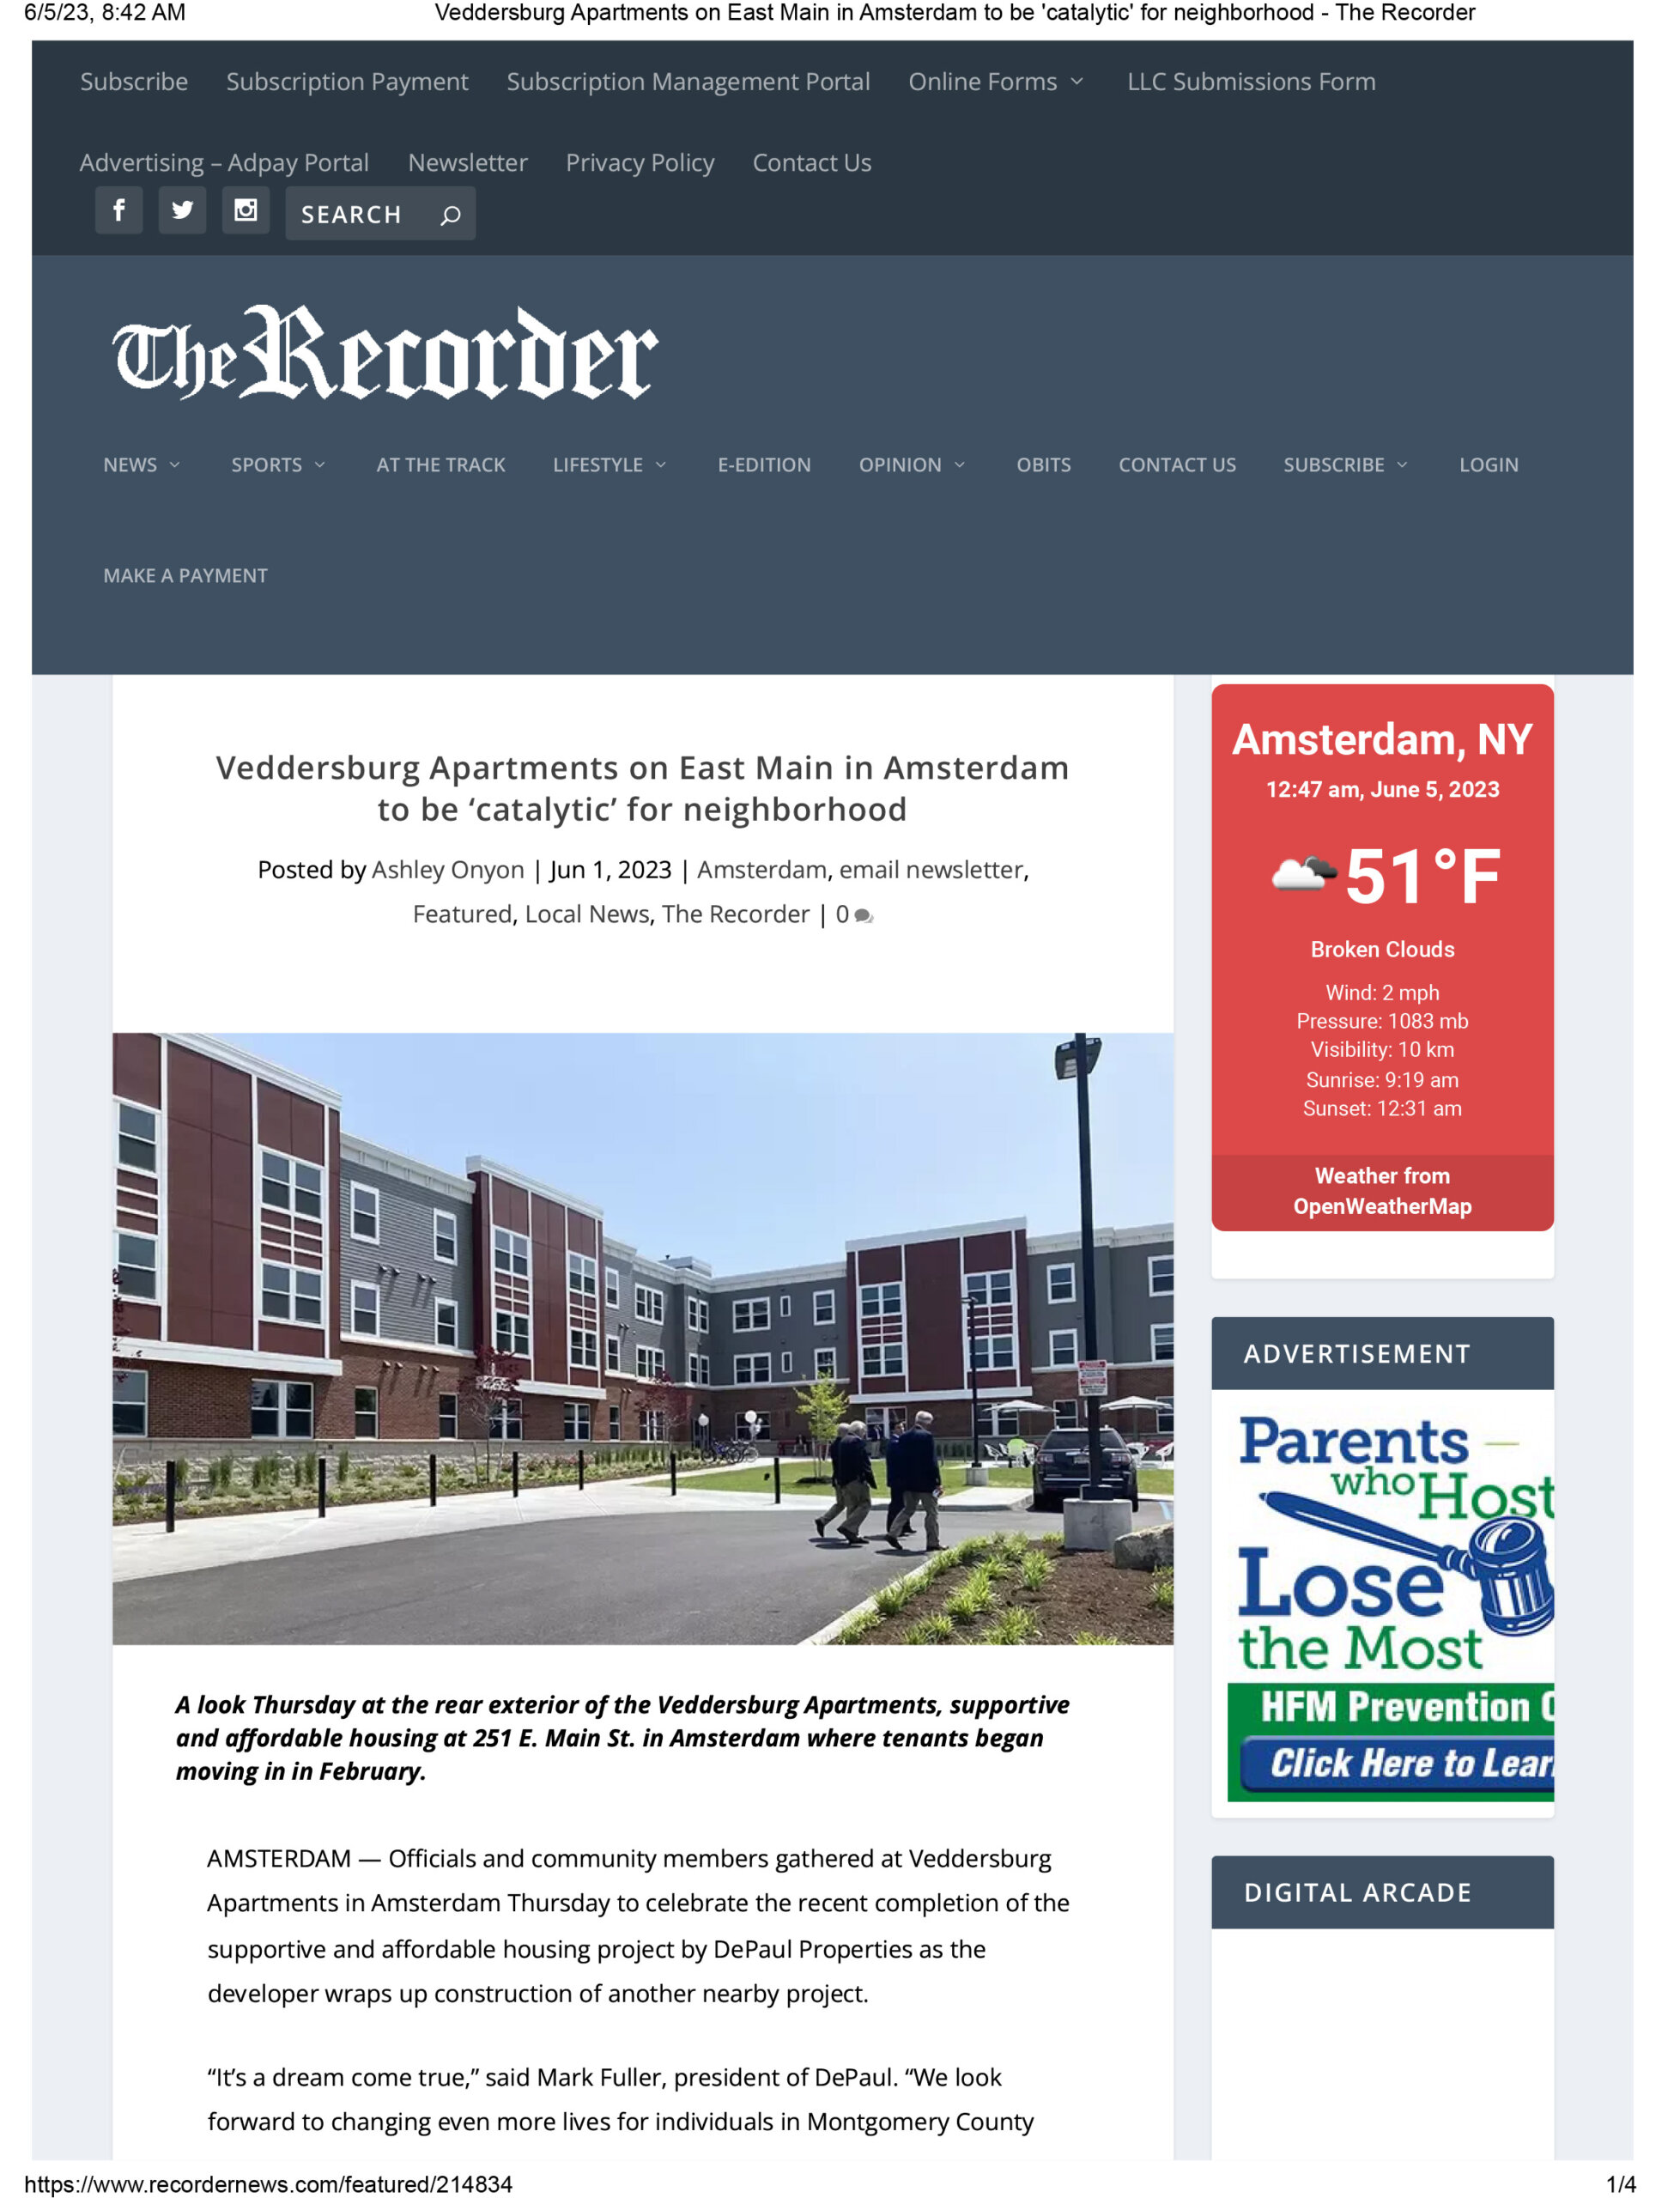 Veddersburg Apartments On East Main In Amsterdam To Be 'catalytic' For Neighborhood The Recorder 1